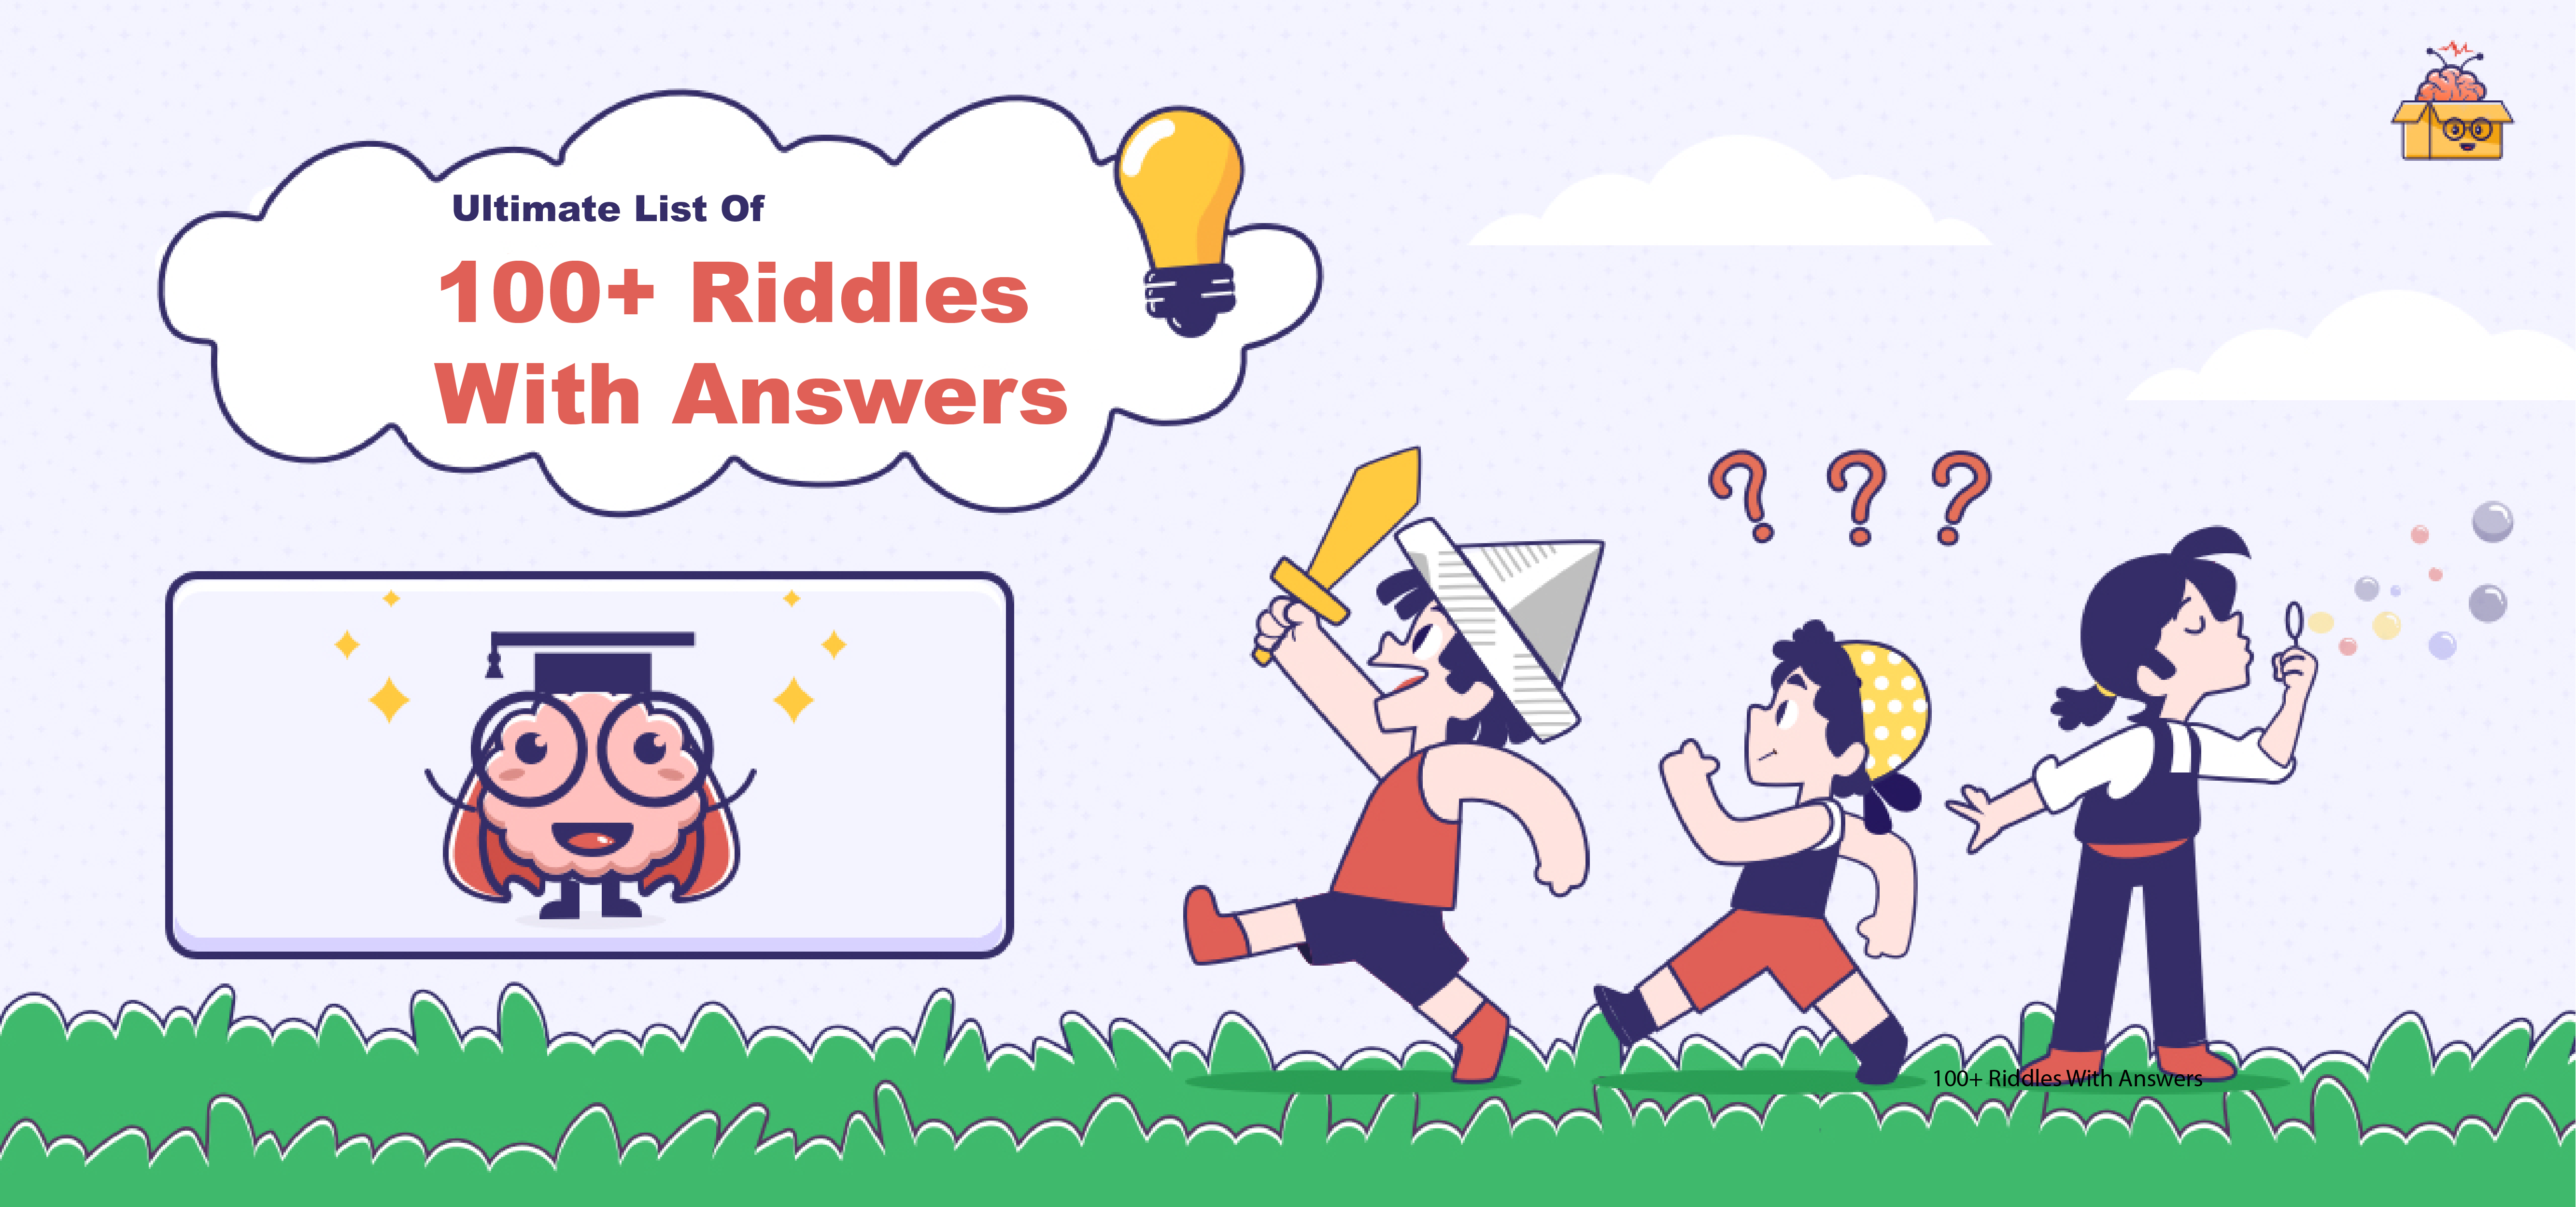 7 Riddles That Will Test Your Brain Power 